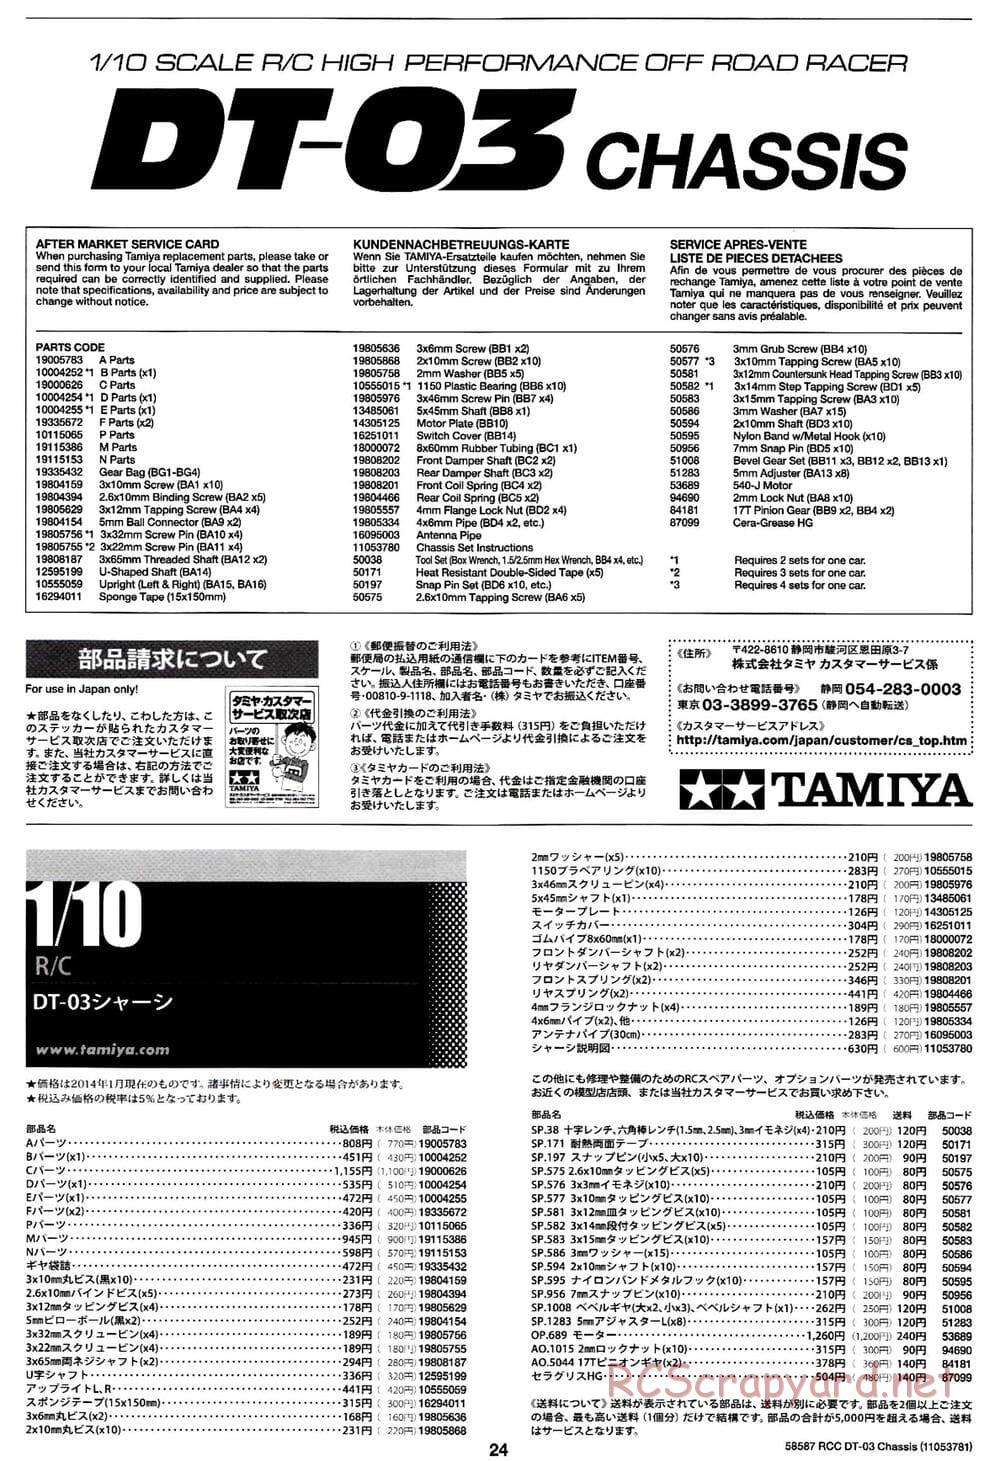 Tamiya - Neo Fighter Buggy Chassis - Manual - Page 24